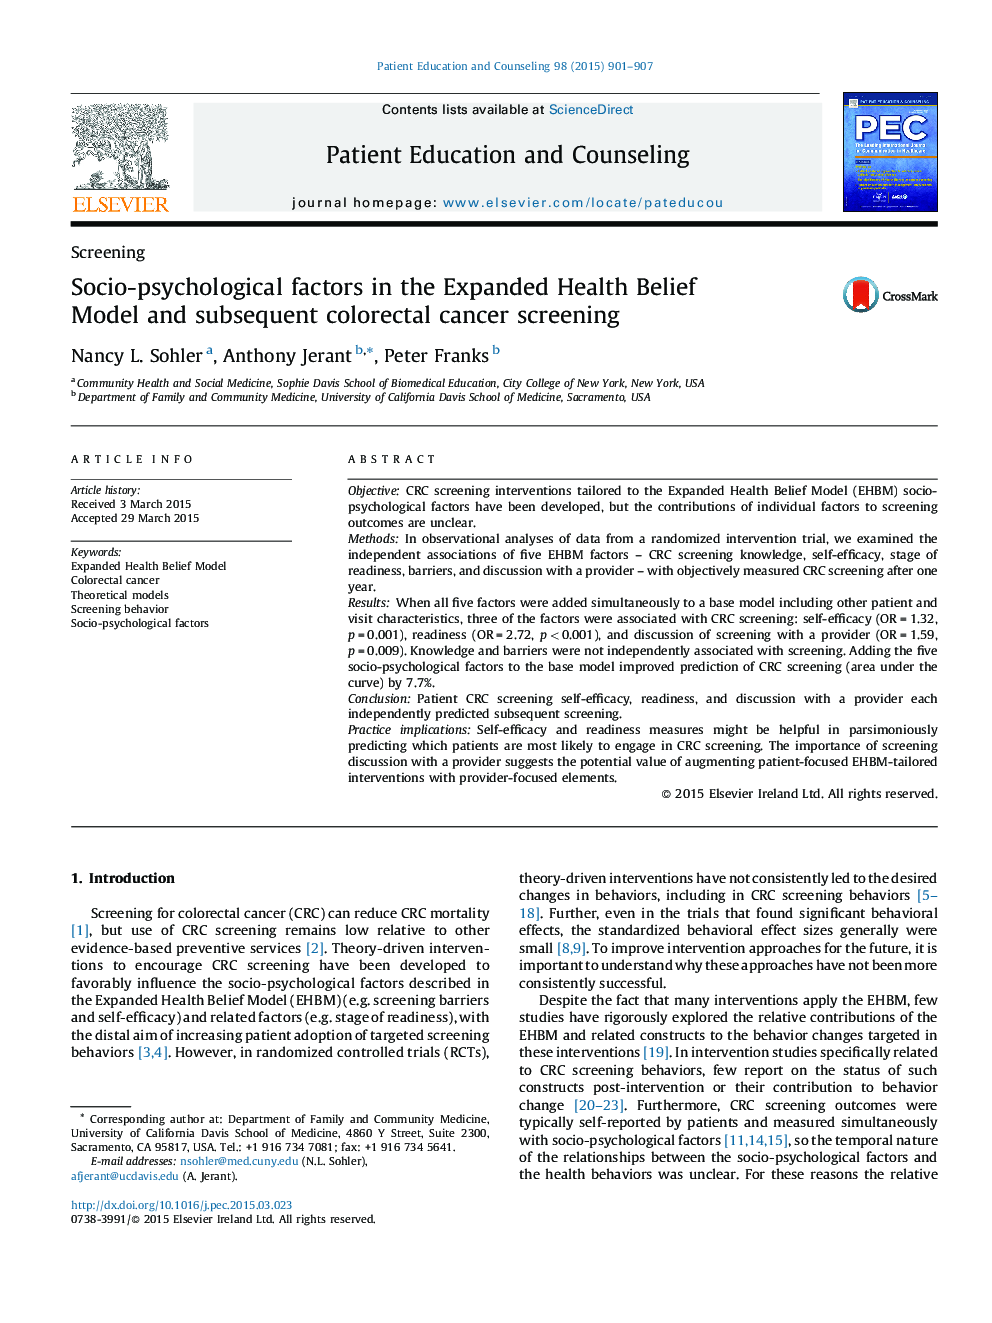 Socio-psychological factors in the Expanded Health Belief Model and subsequent colorectal cancer screening